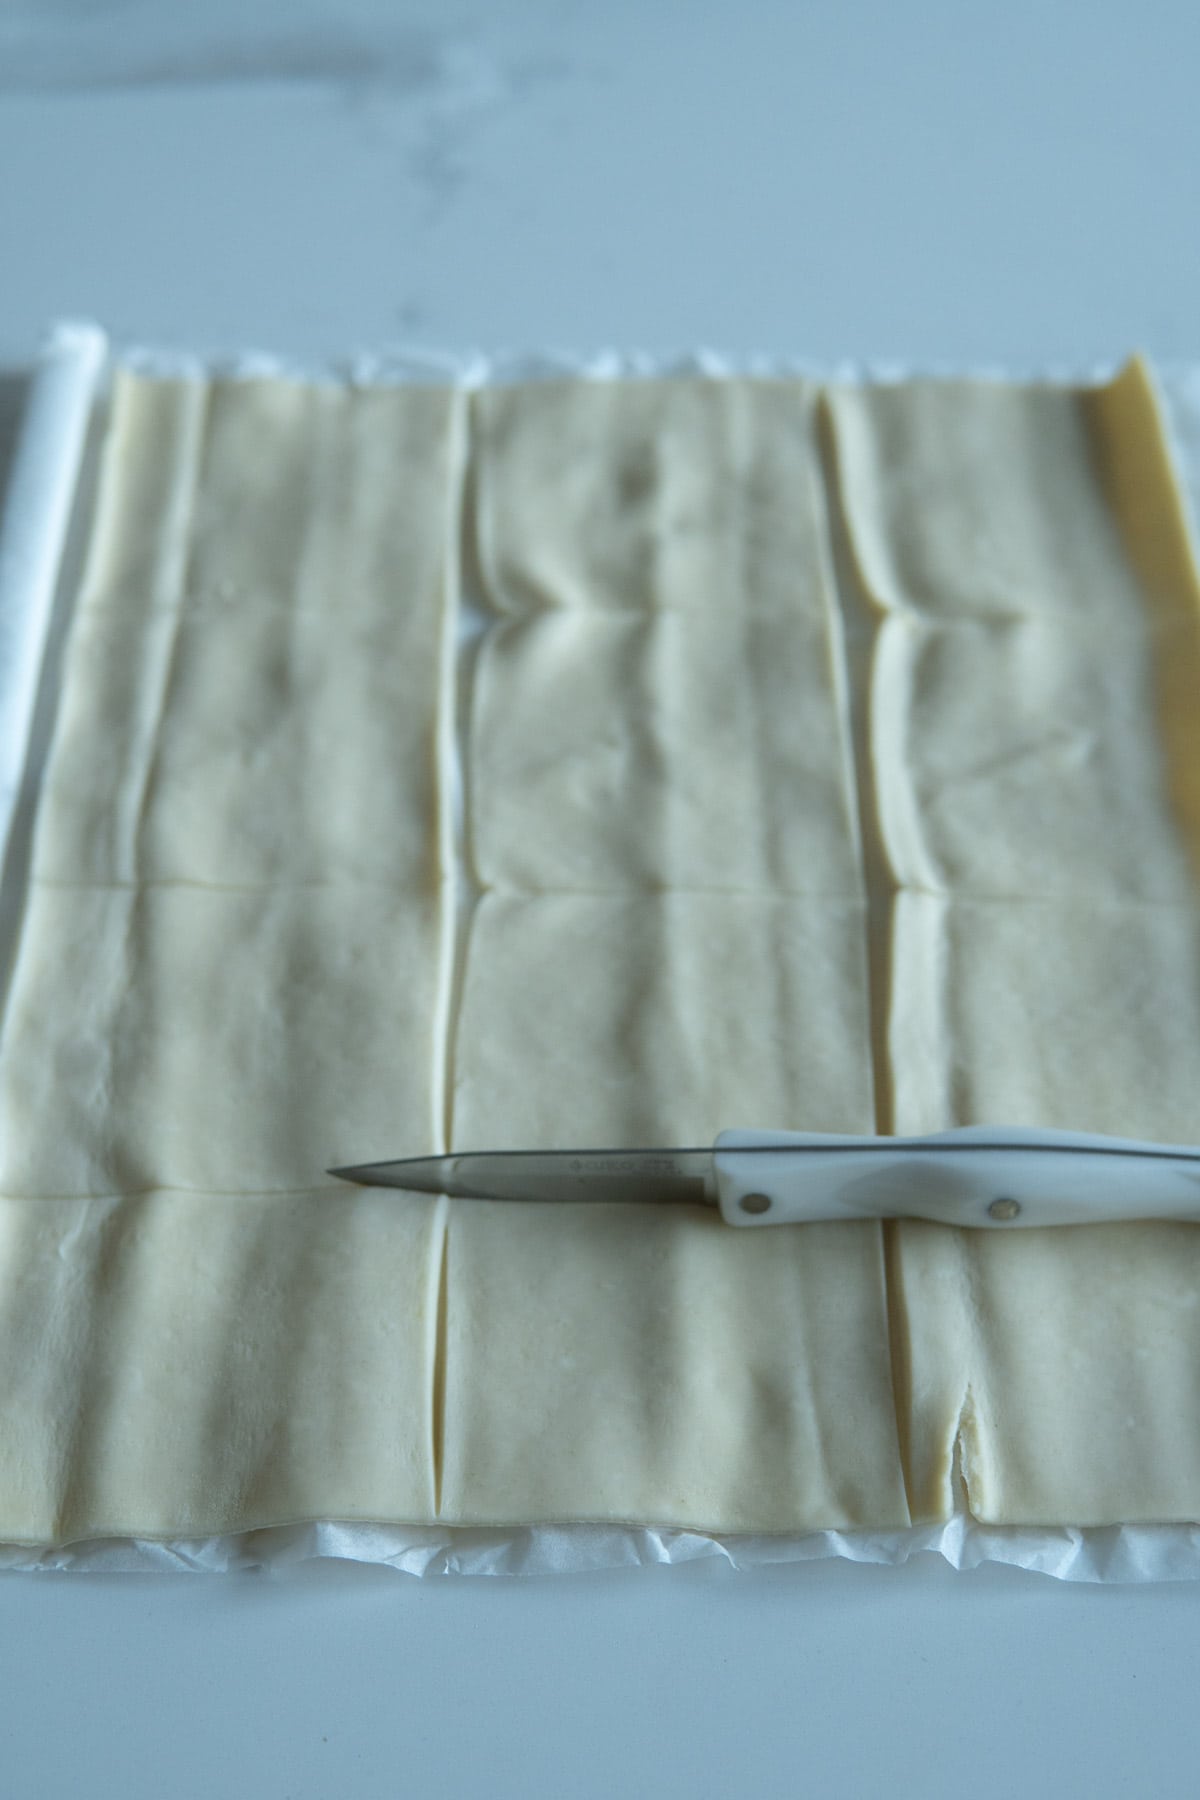 Rolled out puff pastry cut into squares.